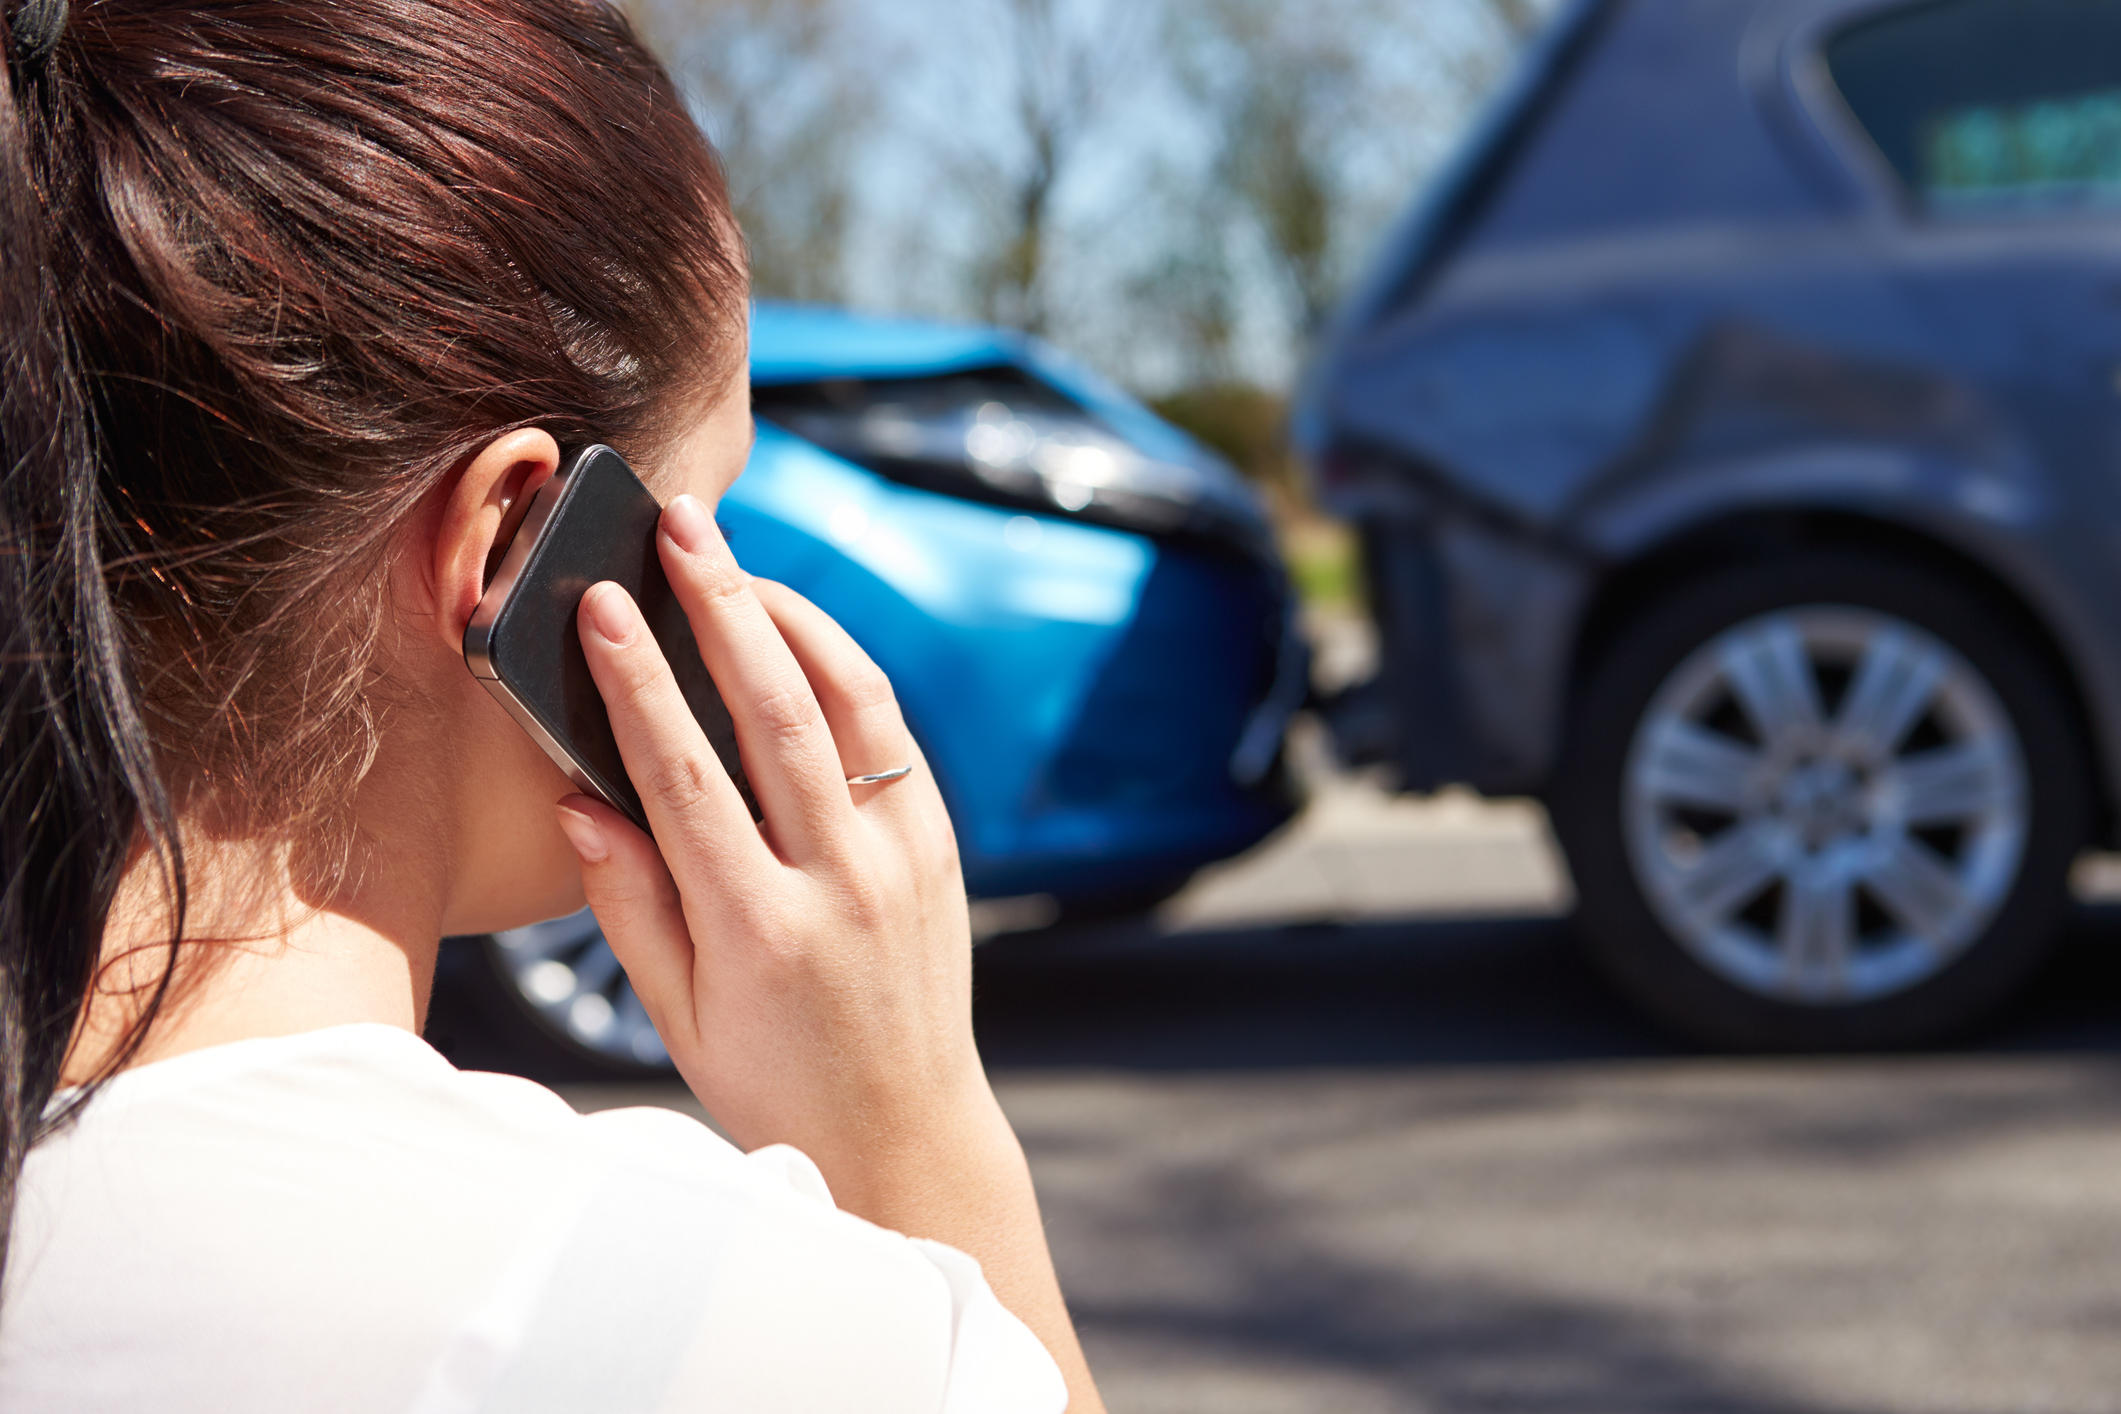 Car accidents can cause a lot of trouble for you and your car. Feel free to contact us if you need immediate help, we will get you settled in with an easy process!